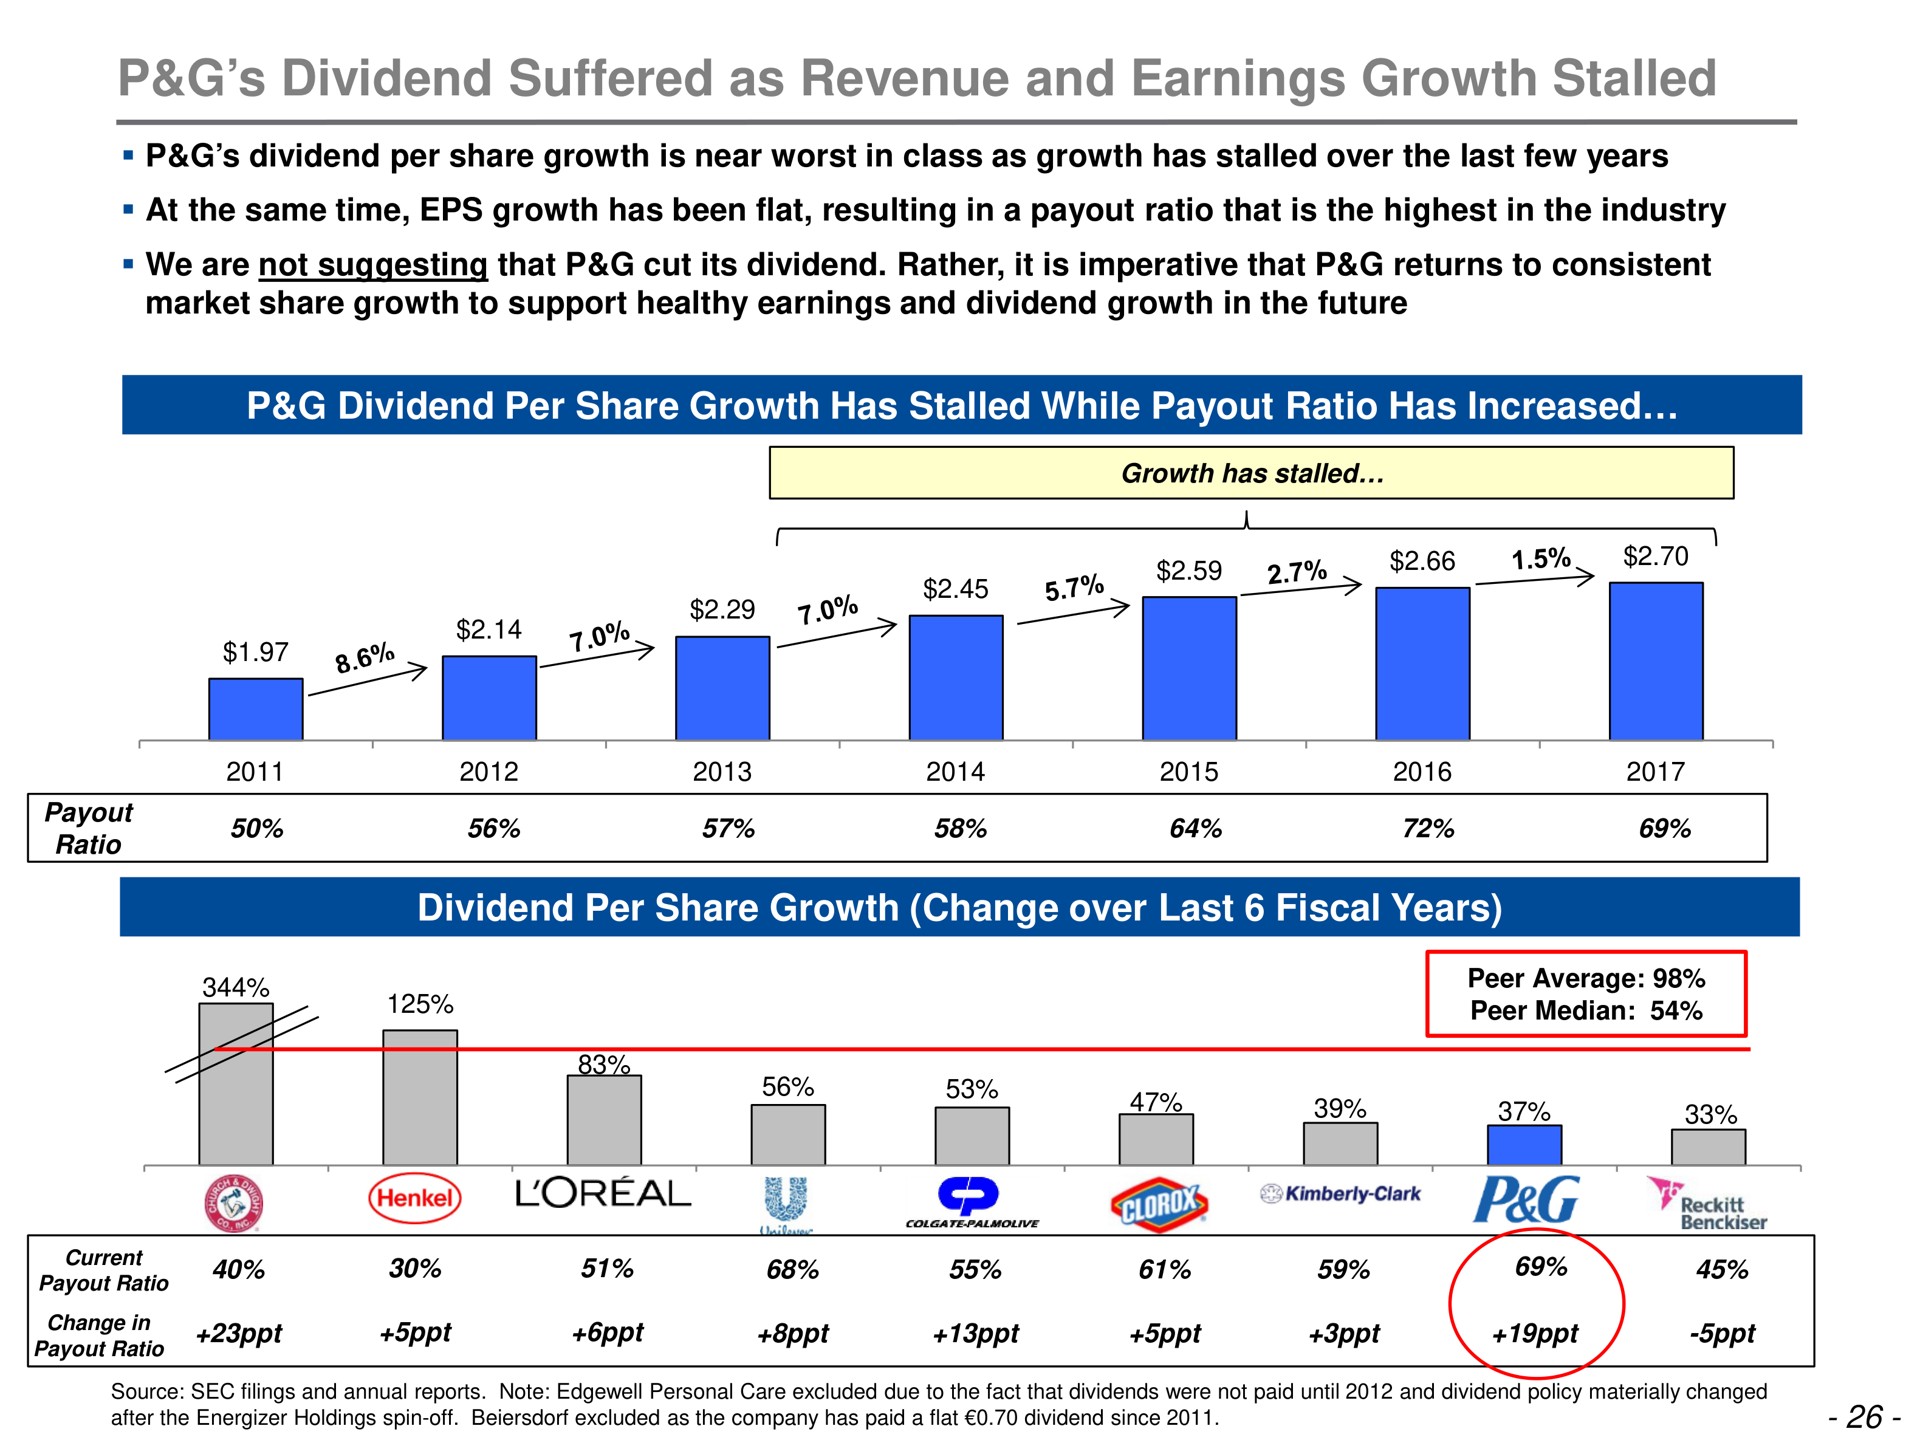 dividend suffered as revenue and earnings growth stalled loreal a | Trian Partners